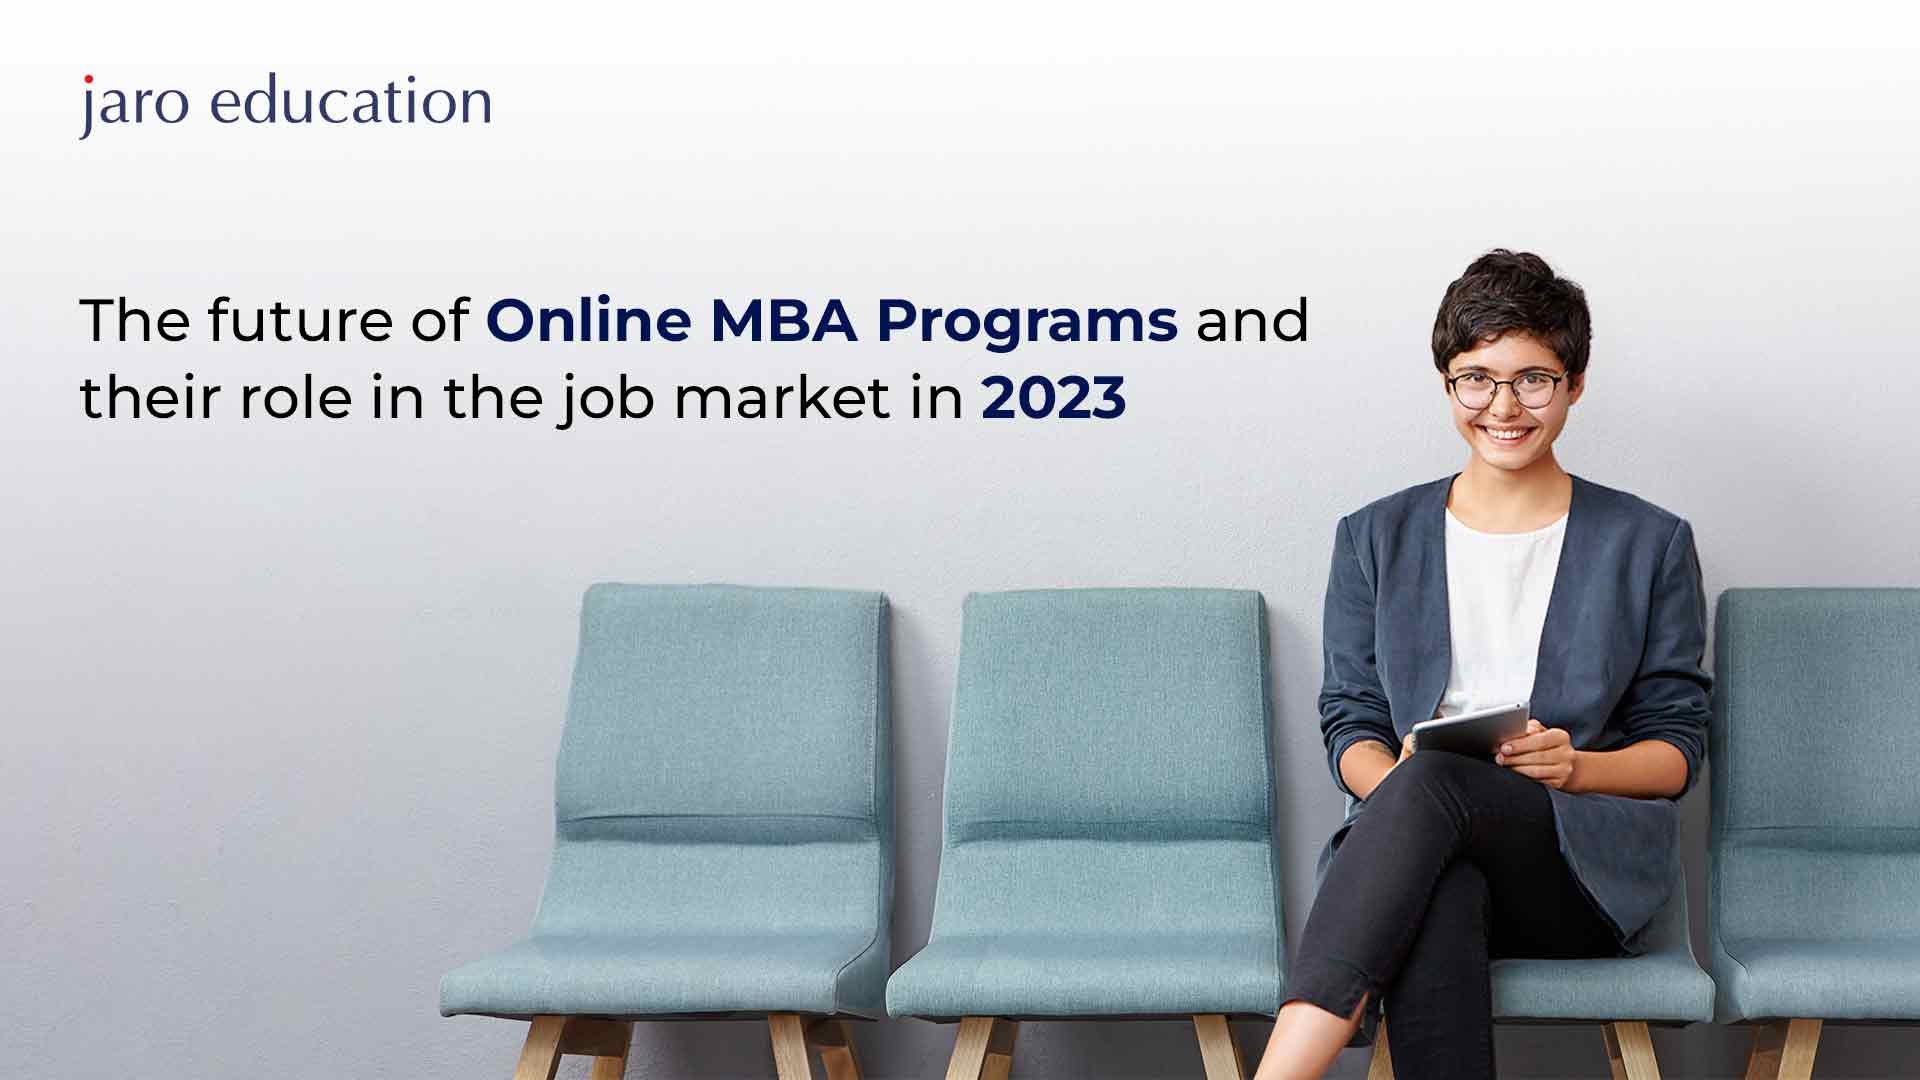 The future-of-online-MBA-programs-and-their-role-in-the-job-market-in-2023-Jaro